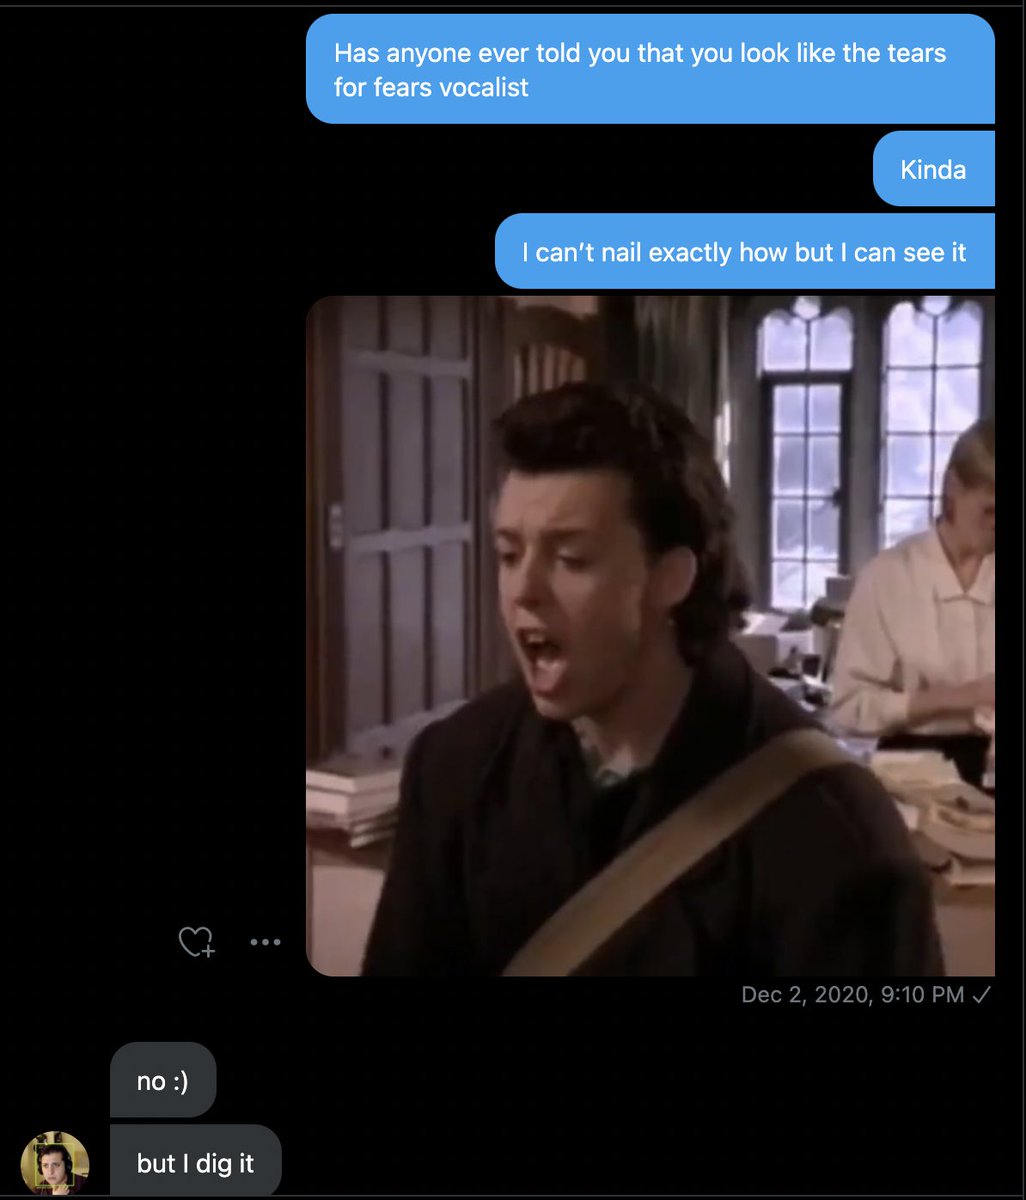 taking this opportunity to point out that  @jdan looks like the tears for fears vocalist (to me) and I can't unsee it  https://twitter.com/jdan/status/1386345646811193347?s=20